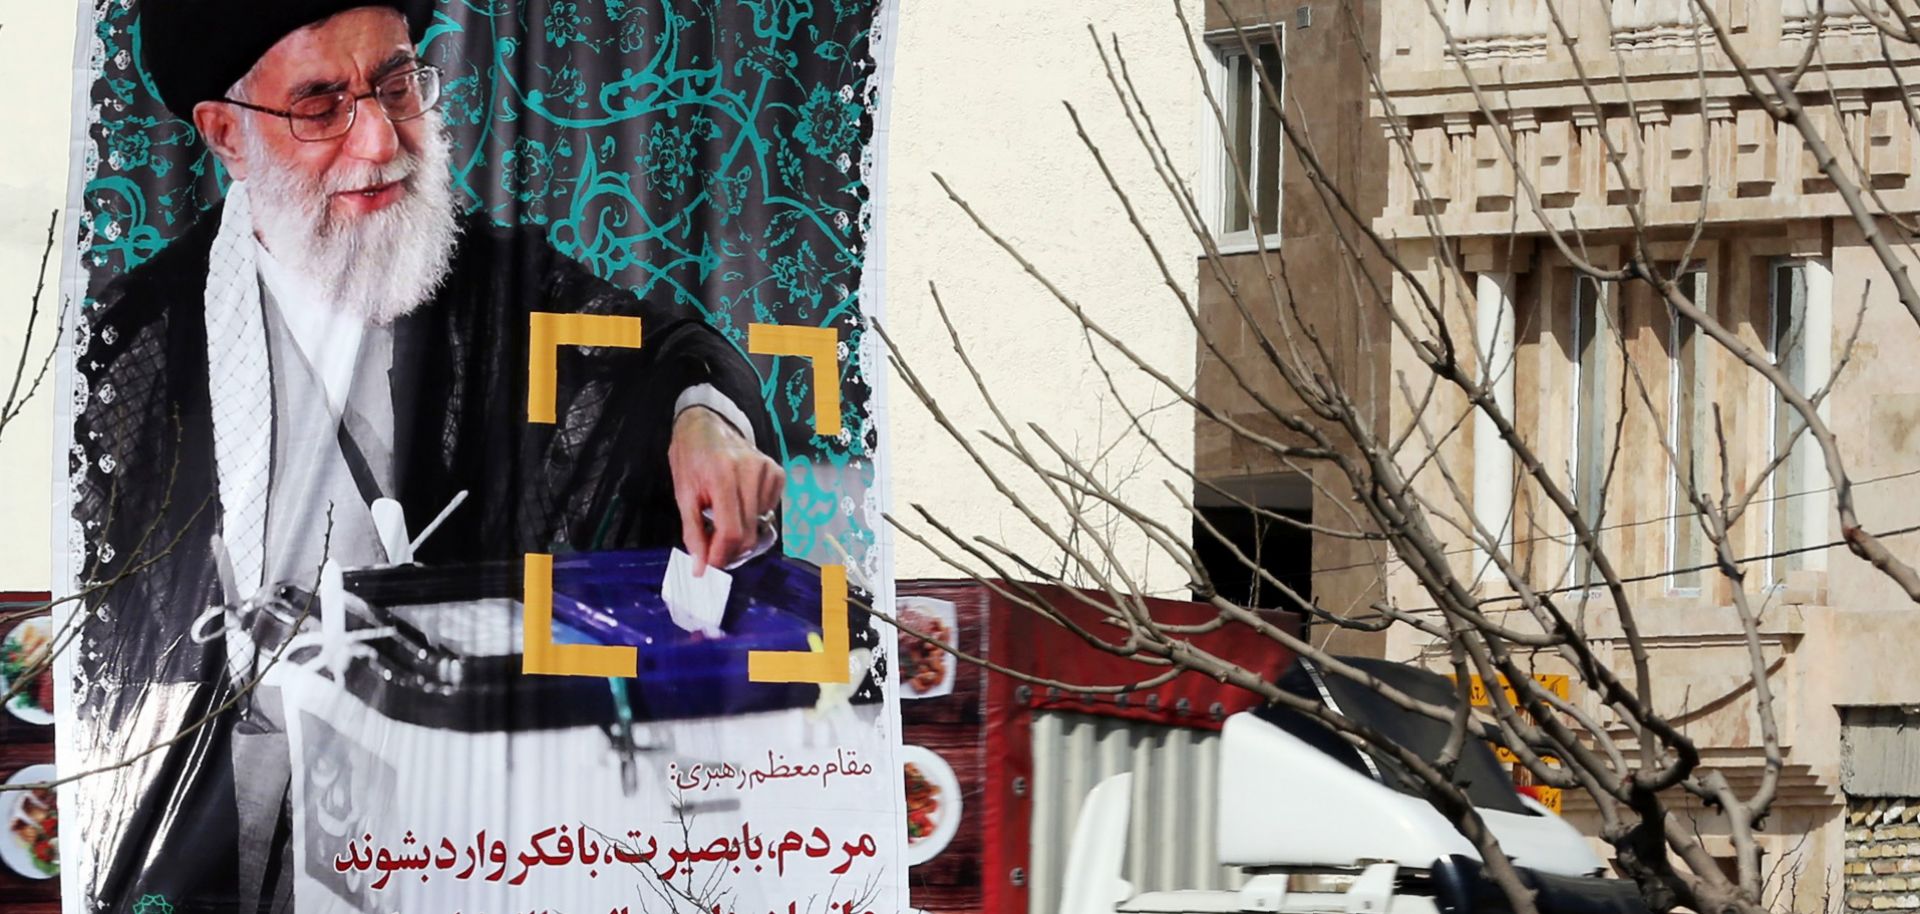 In Tehran, a banner encouraging voter participation depicts Iranian Supreme Leader Ayatollah Ali Khamenei. Moderate, reformist candidates have a chance to perform well in Iran's parliamentary elections Feb. 26.